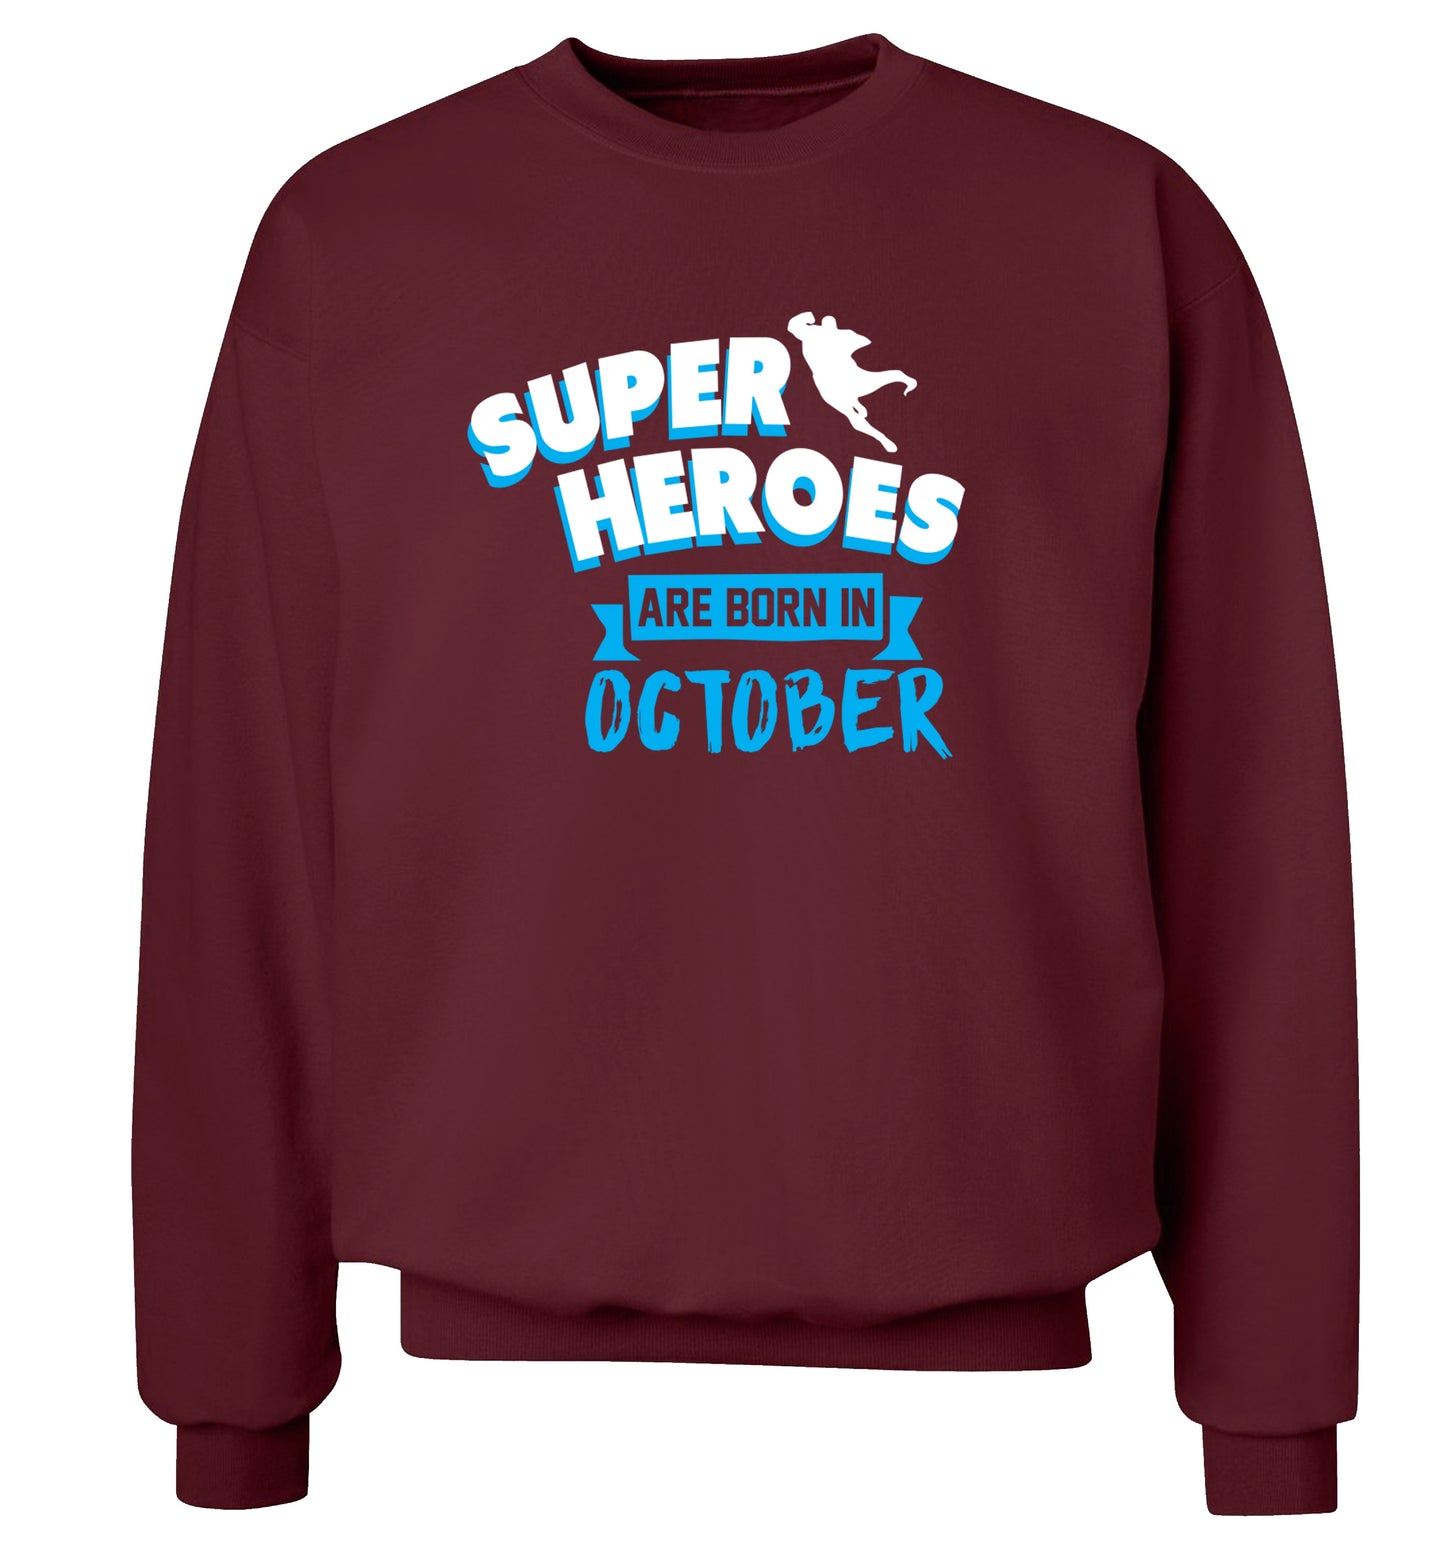 Superheroes are born in October Adult's unisex maroon Sweater 2XL